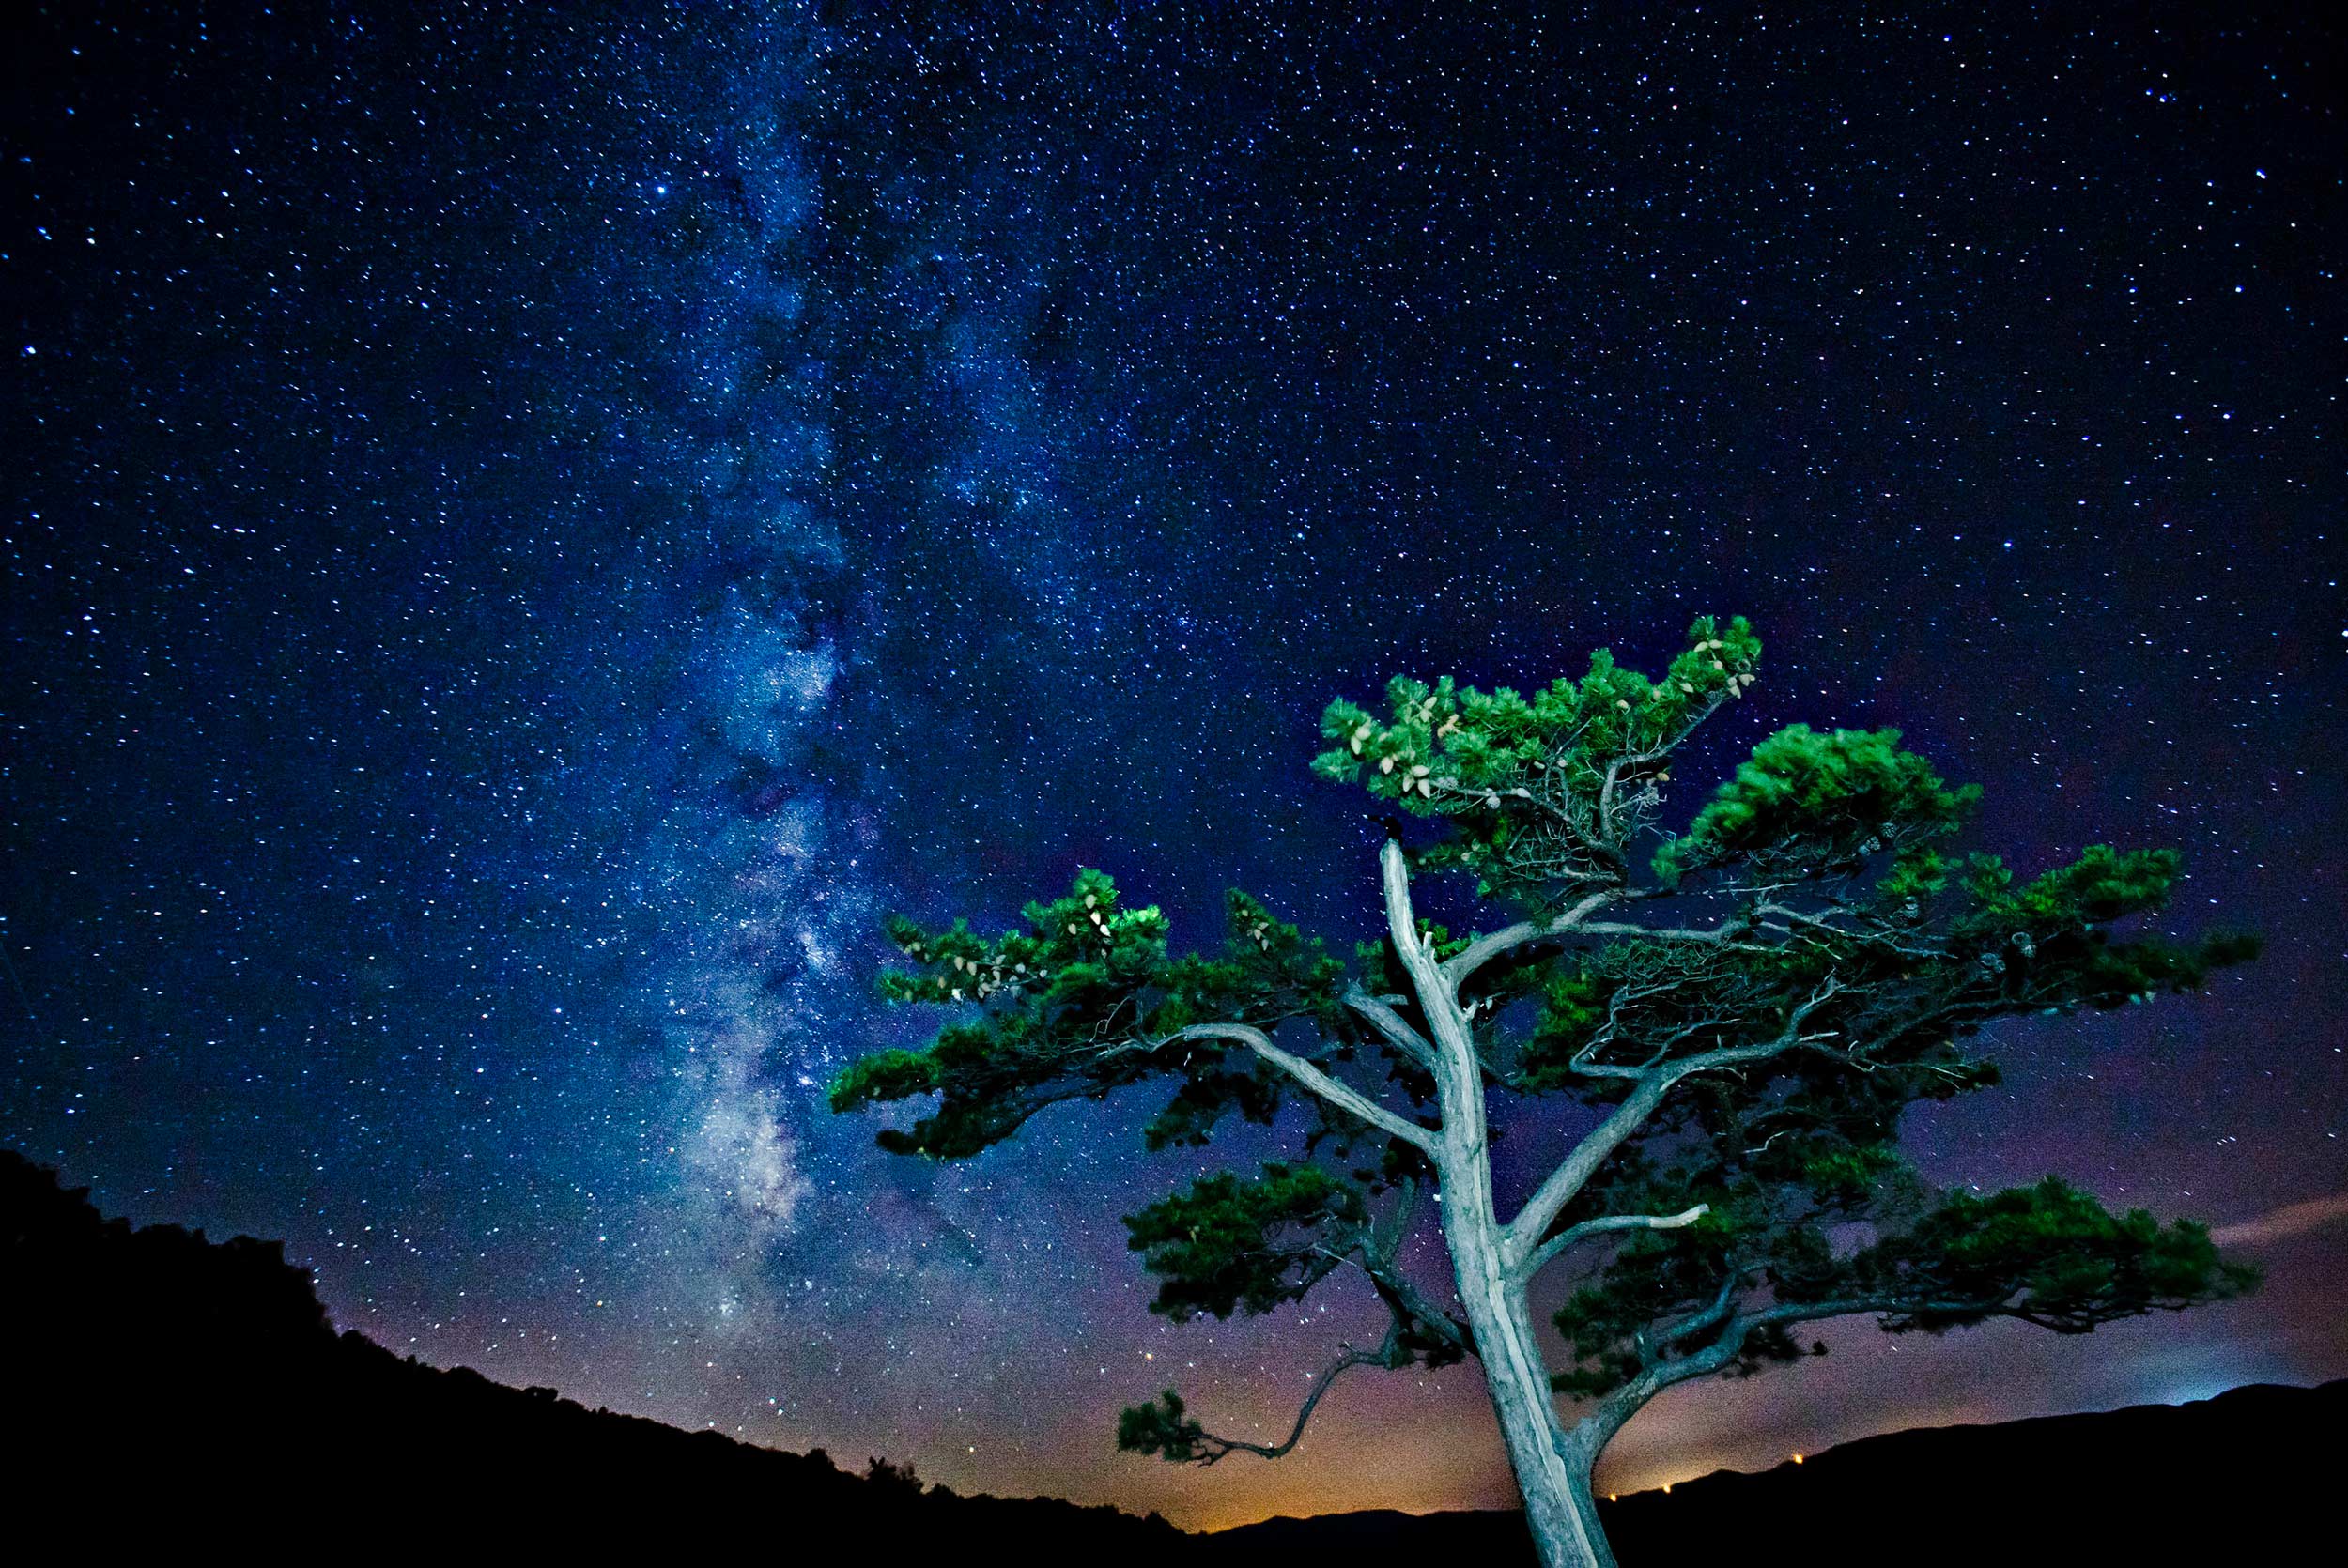 Drawing of the milkyway and a tree